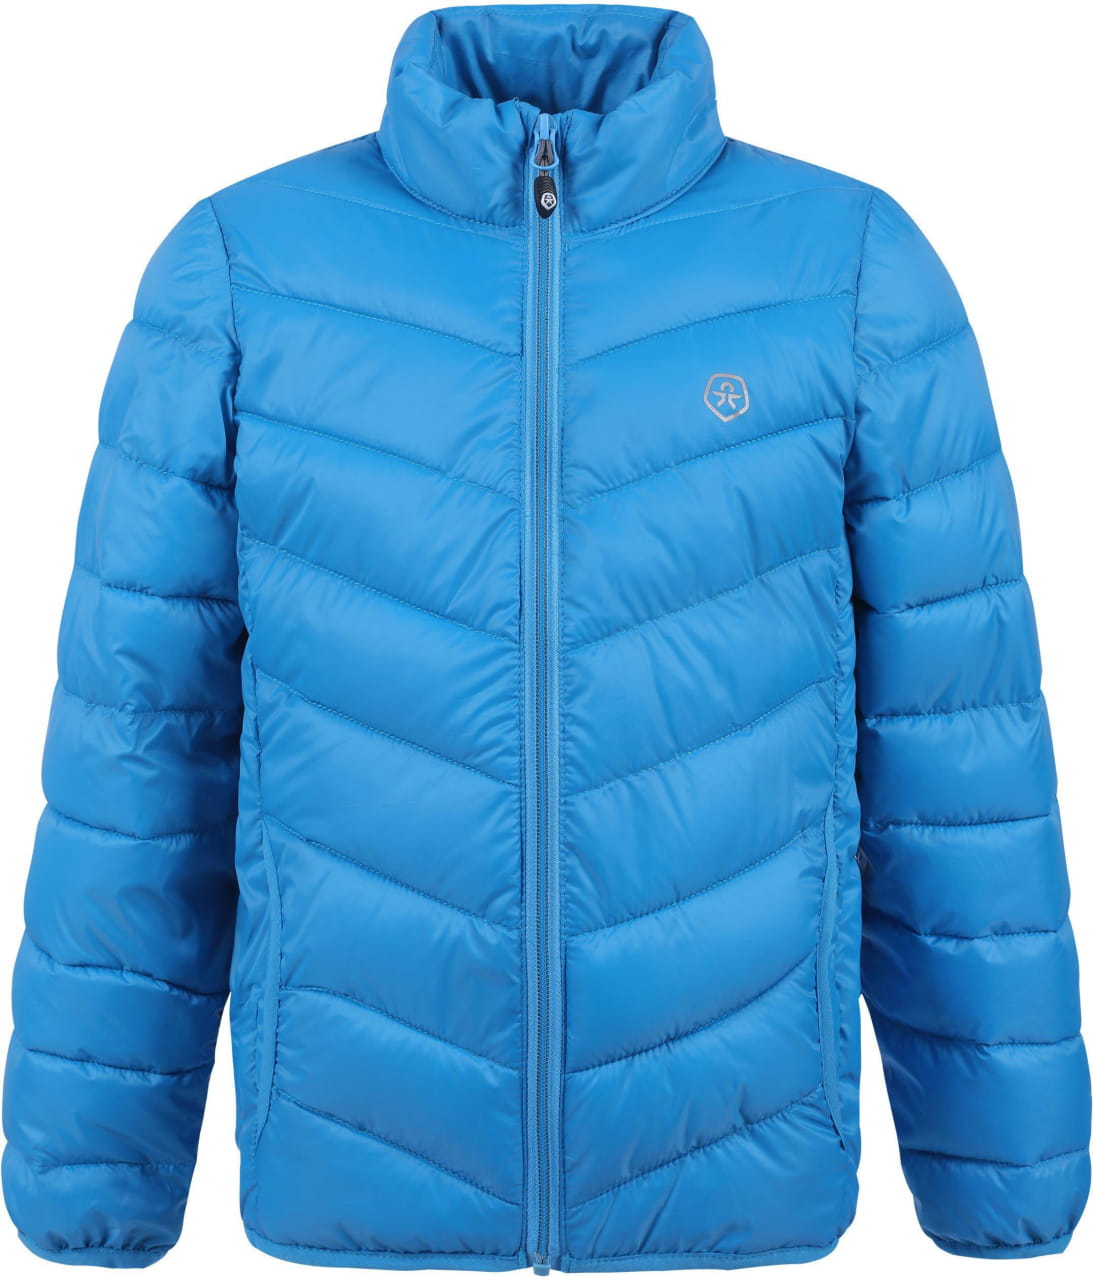 Giacca invernale per bambini Color Kids Jacket